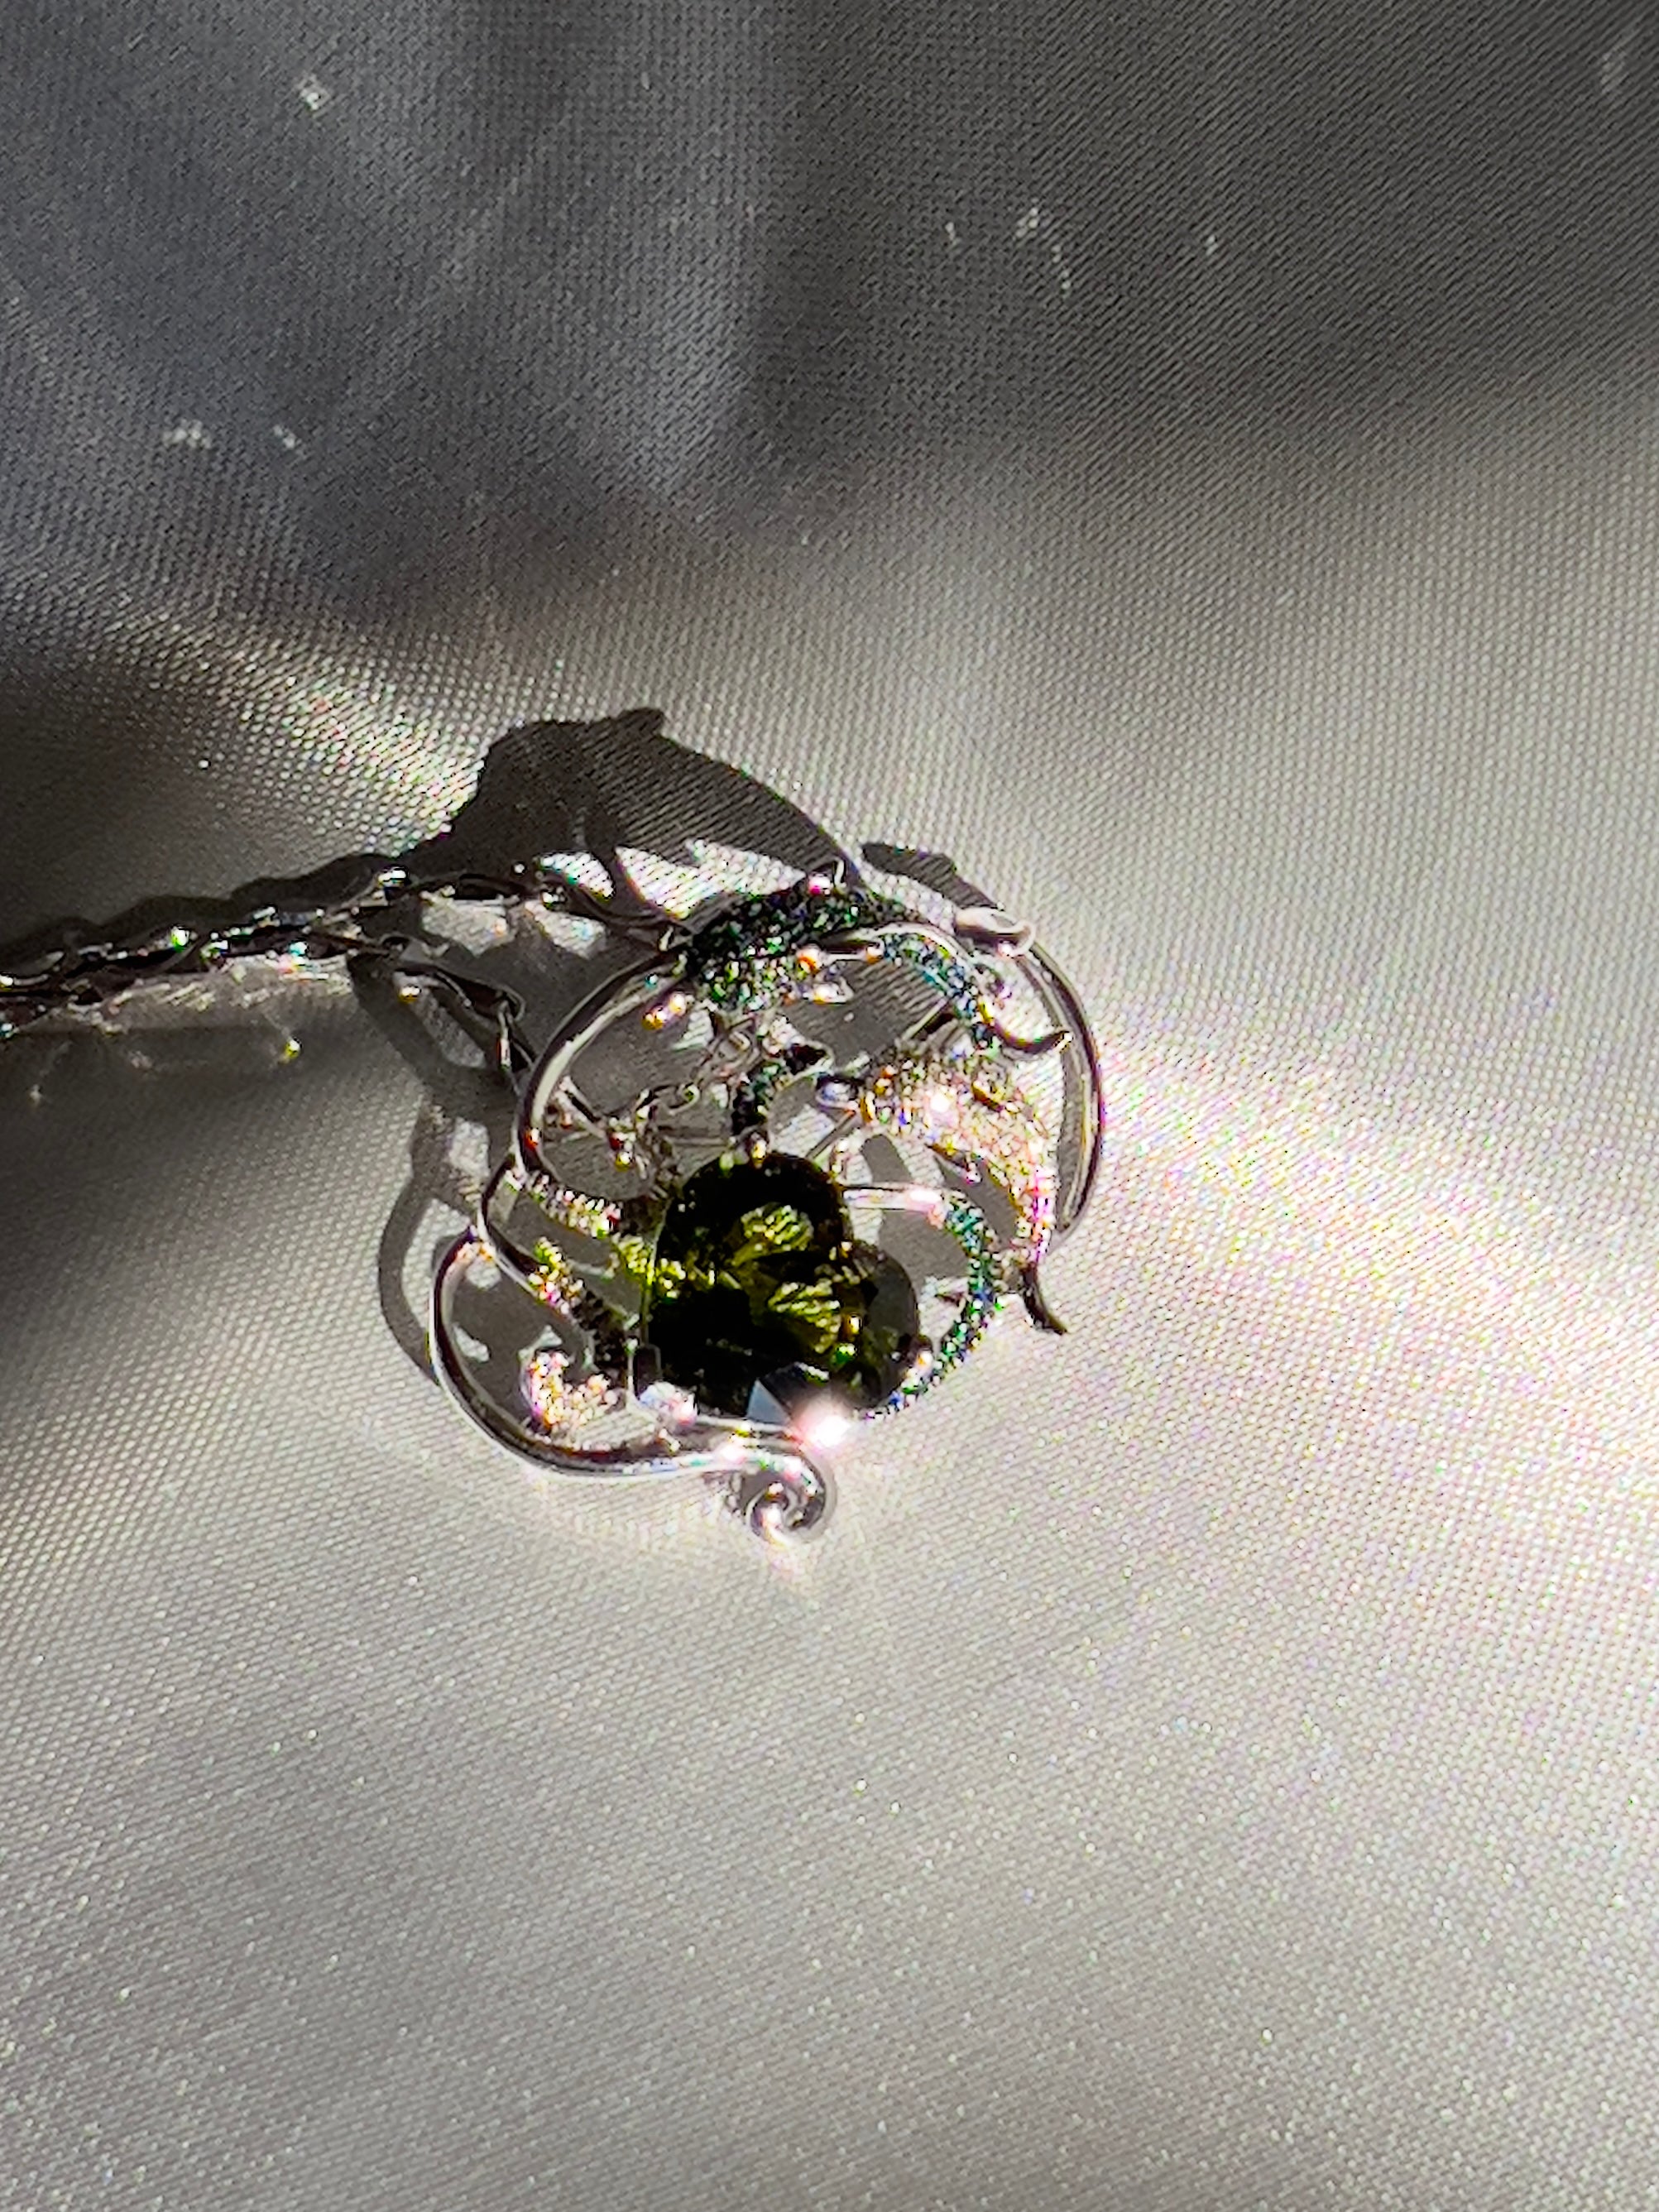 Natural 7.5Ct Lagoon Green Tourmaline with Tsavorite and Diamond Dolphins Pendant Brooch in 18K White Gold